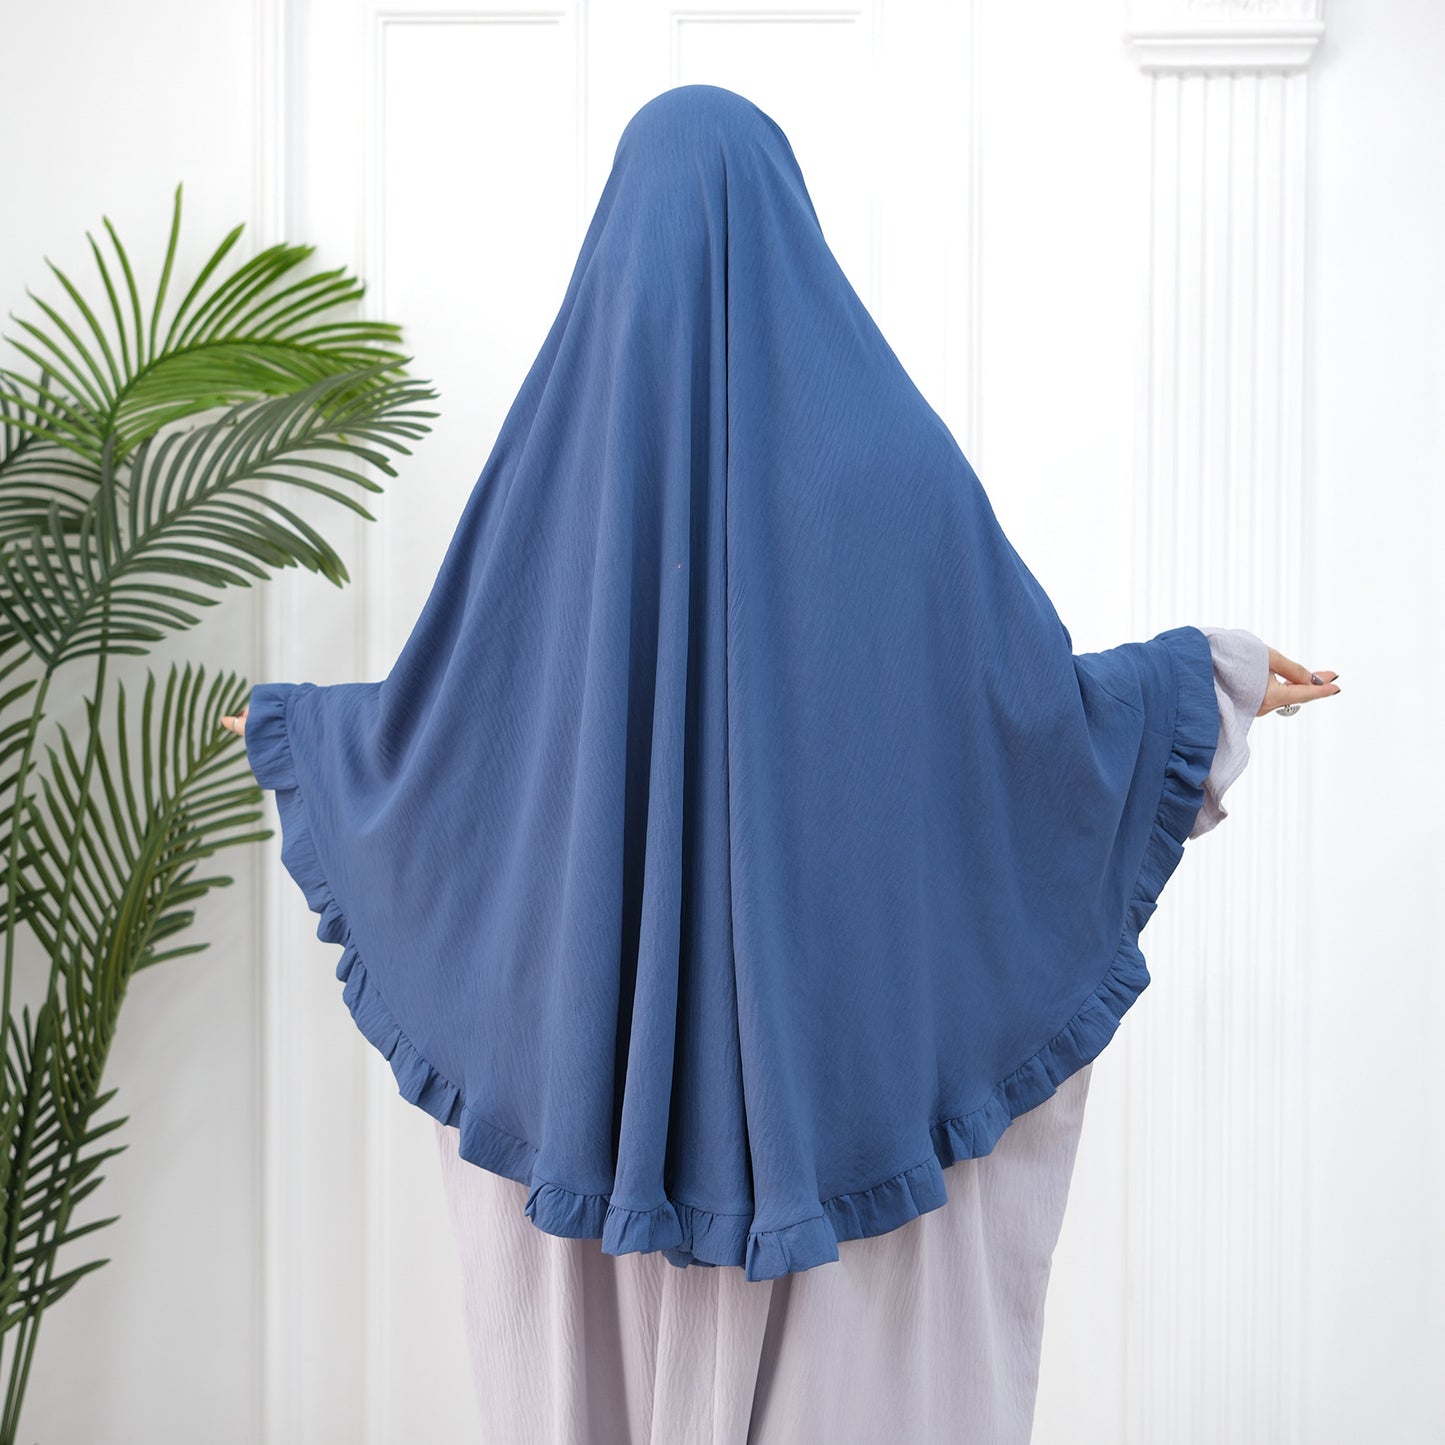 Women's Solid Color Ruffled Hijab